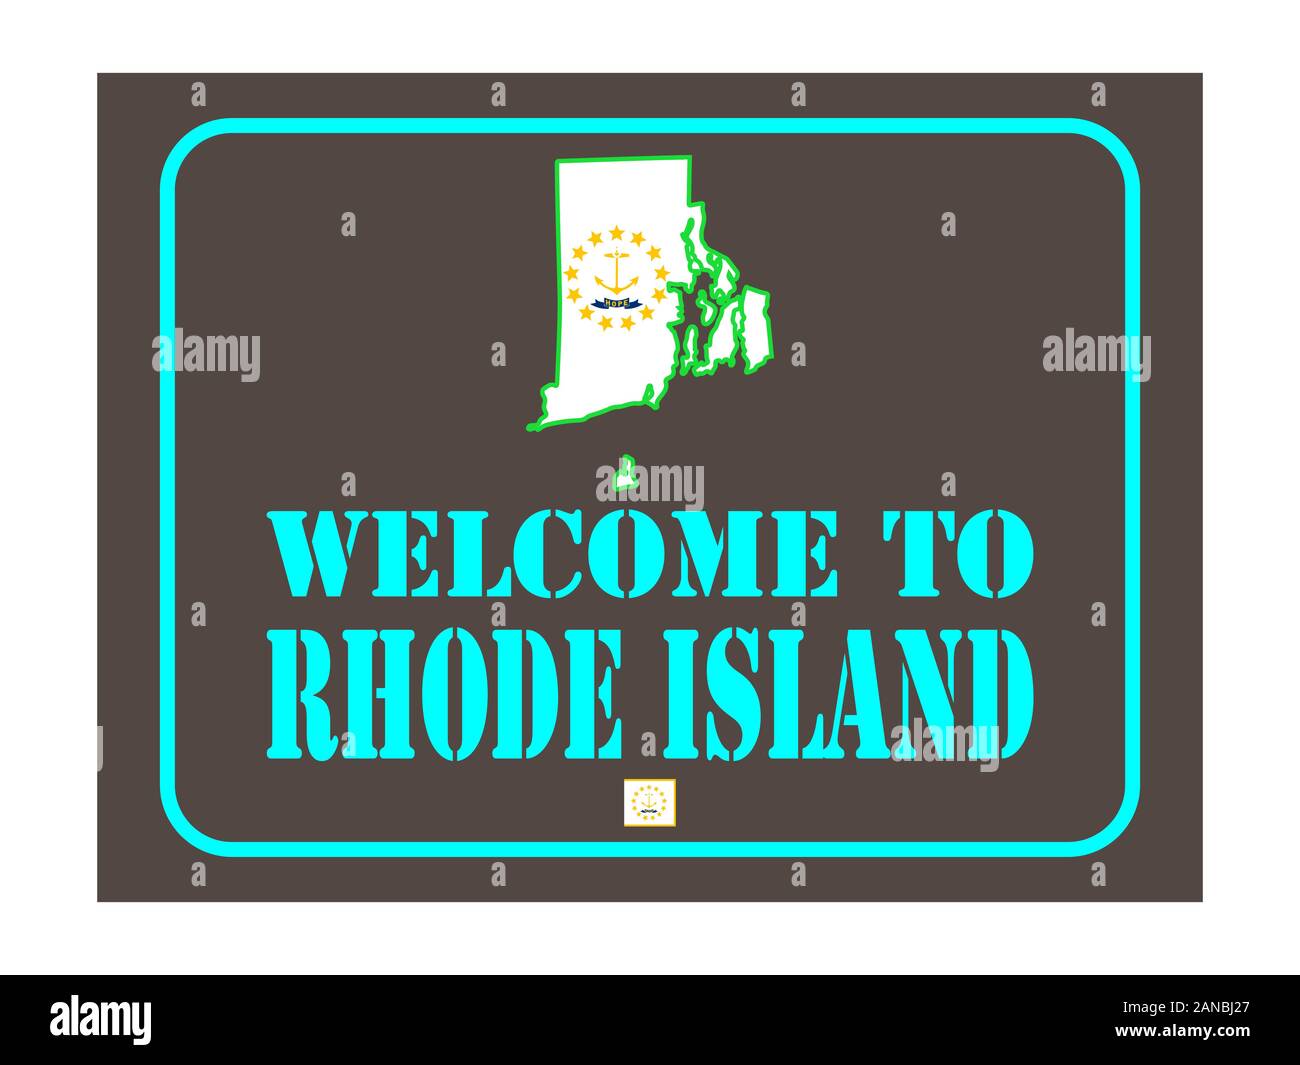 Welcome to Rhode Island sign with flag map Vector illustration Eps 10 Stock Vector